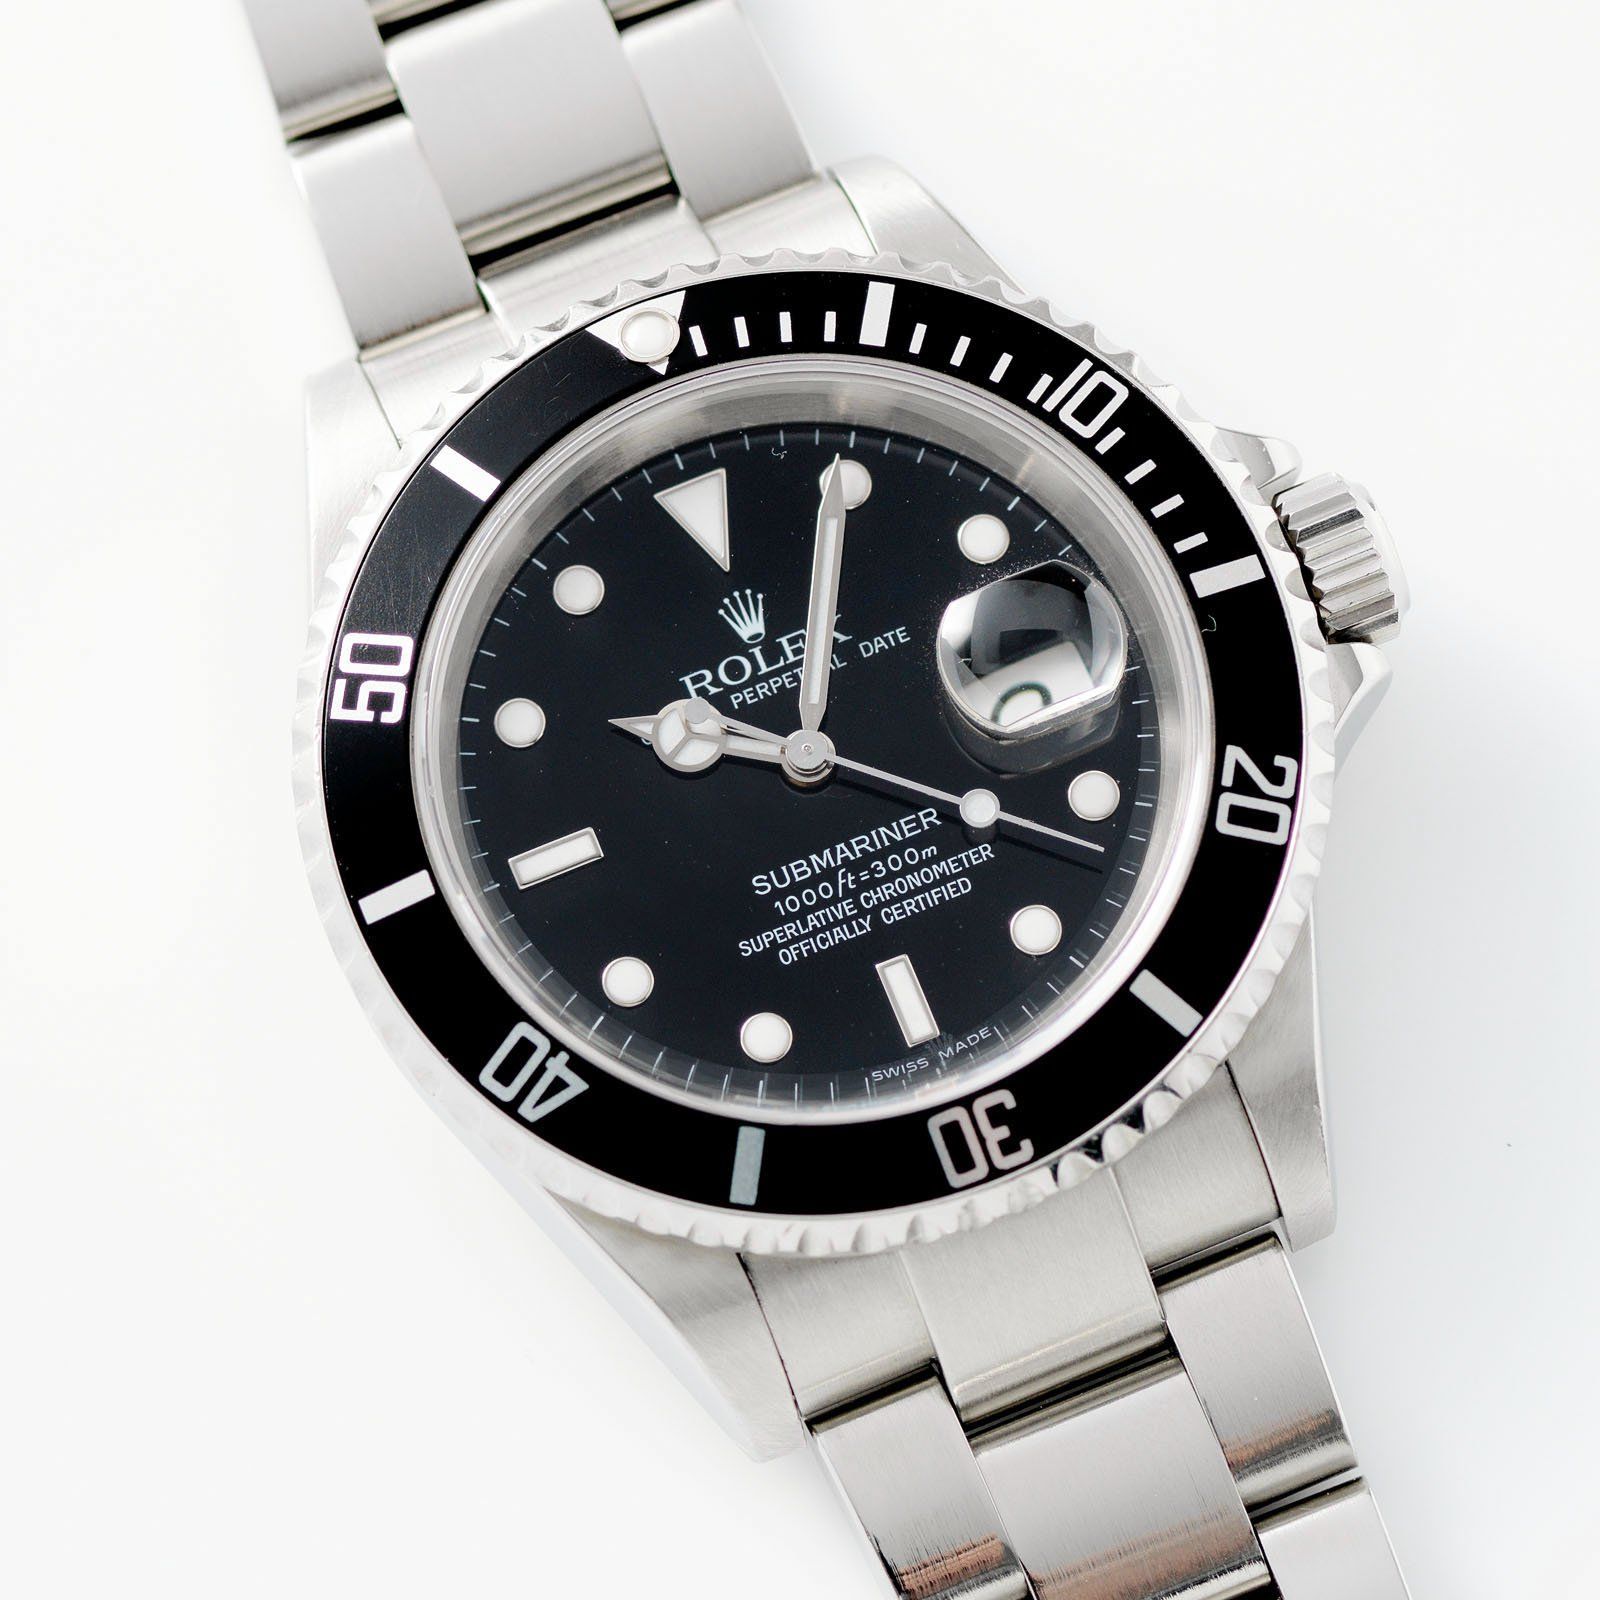 Rolex Submariner Date Reference 16610 Specs